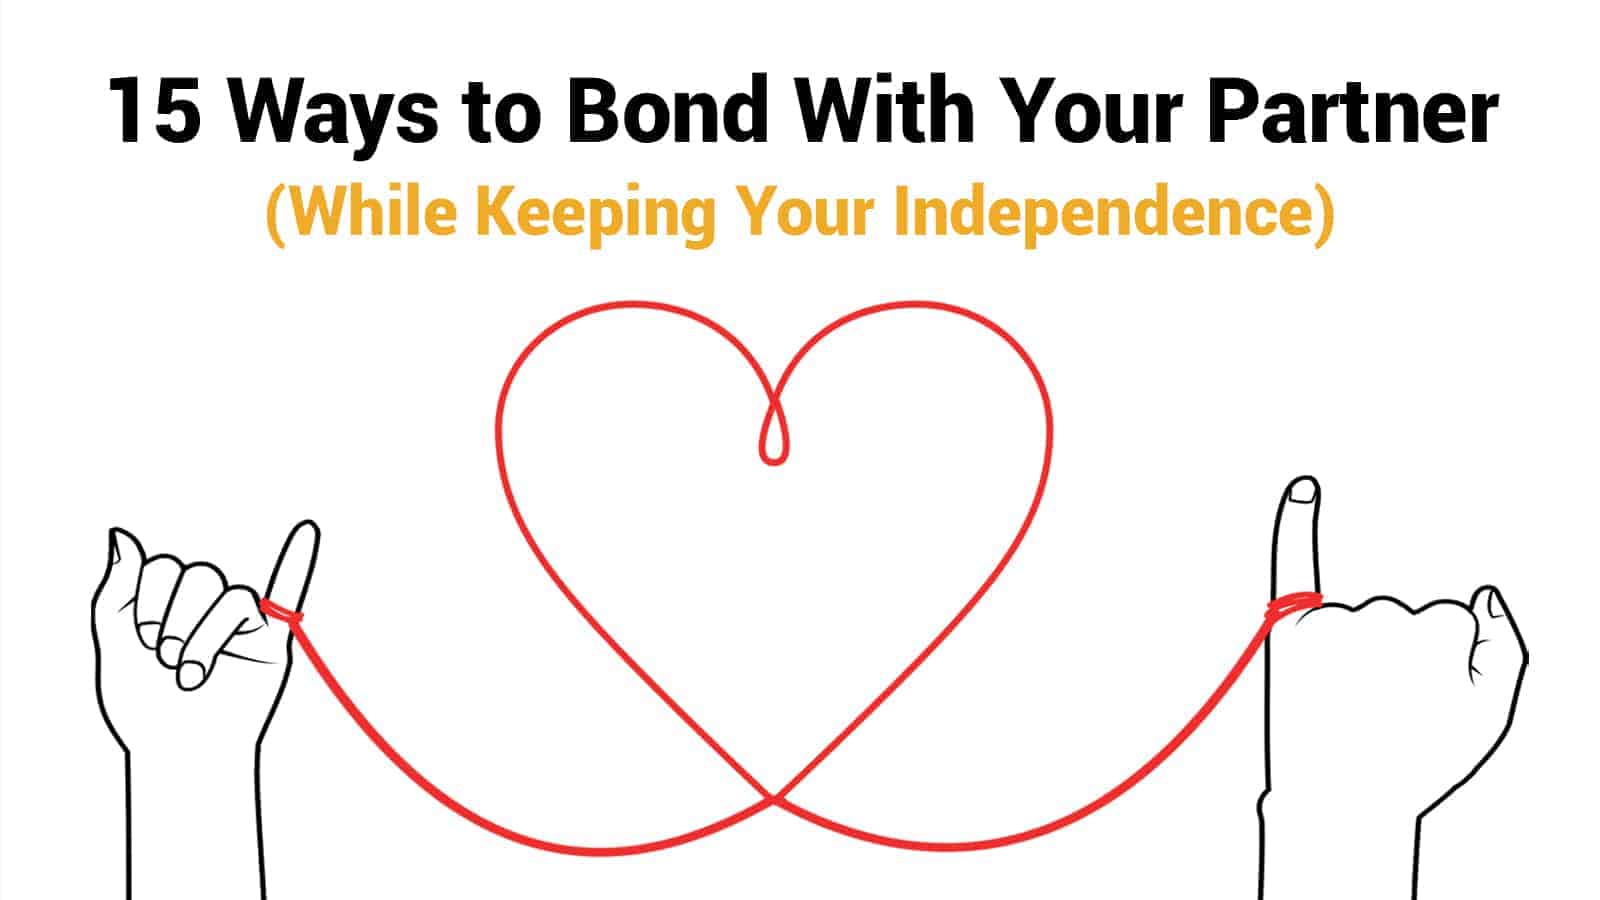 15 Ways to Bond With Your Partner (While Keeping Your Independence)